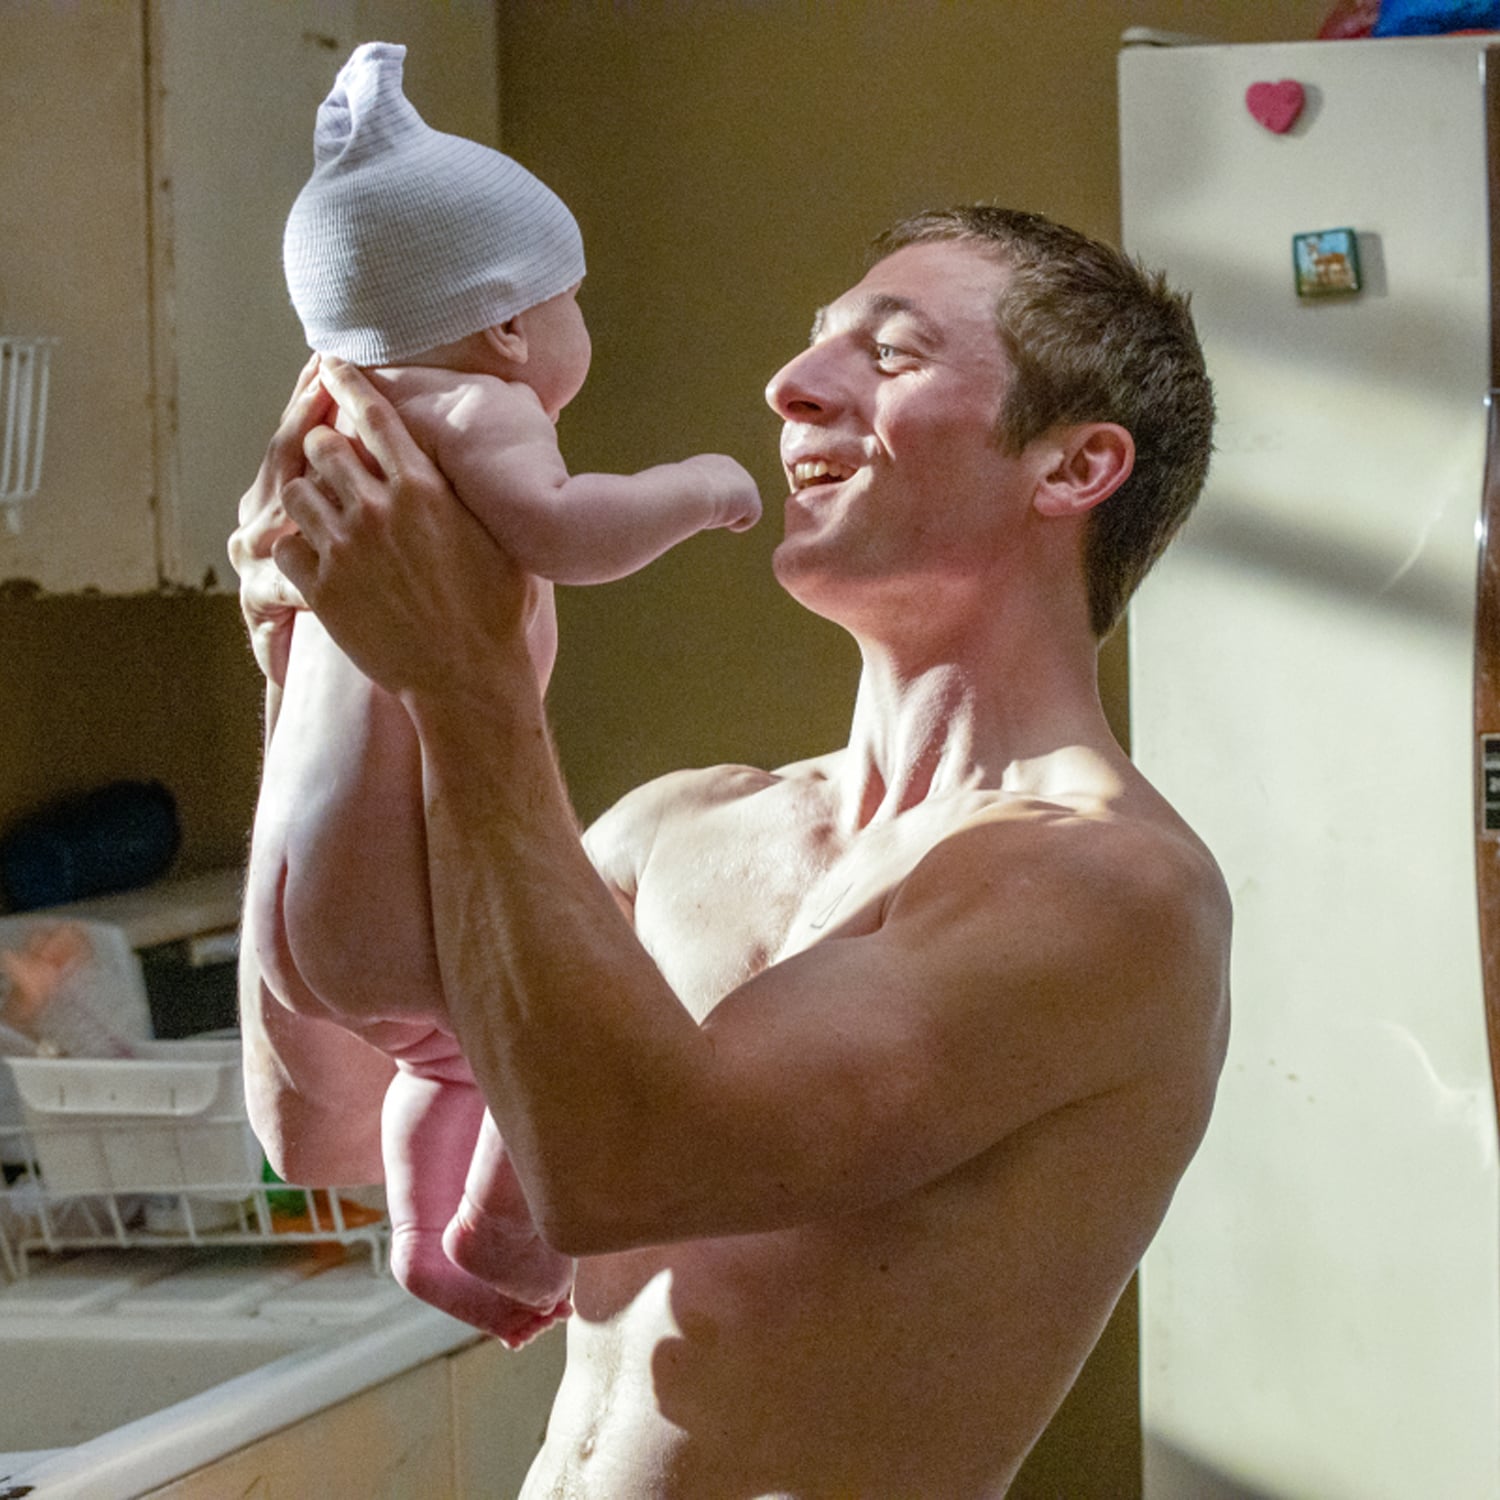 Funny Tweets About Lip Becoming A Dad On Shameless Popsugar Image informati...